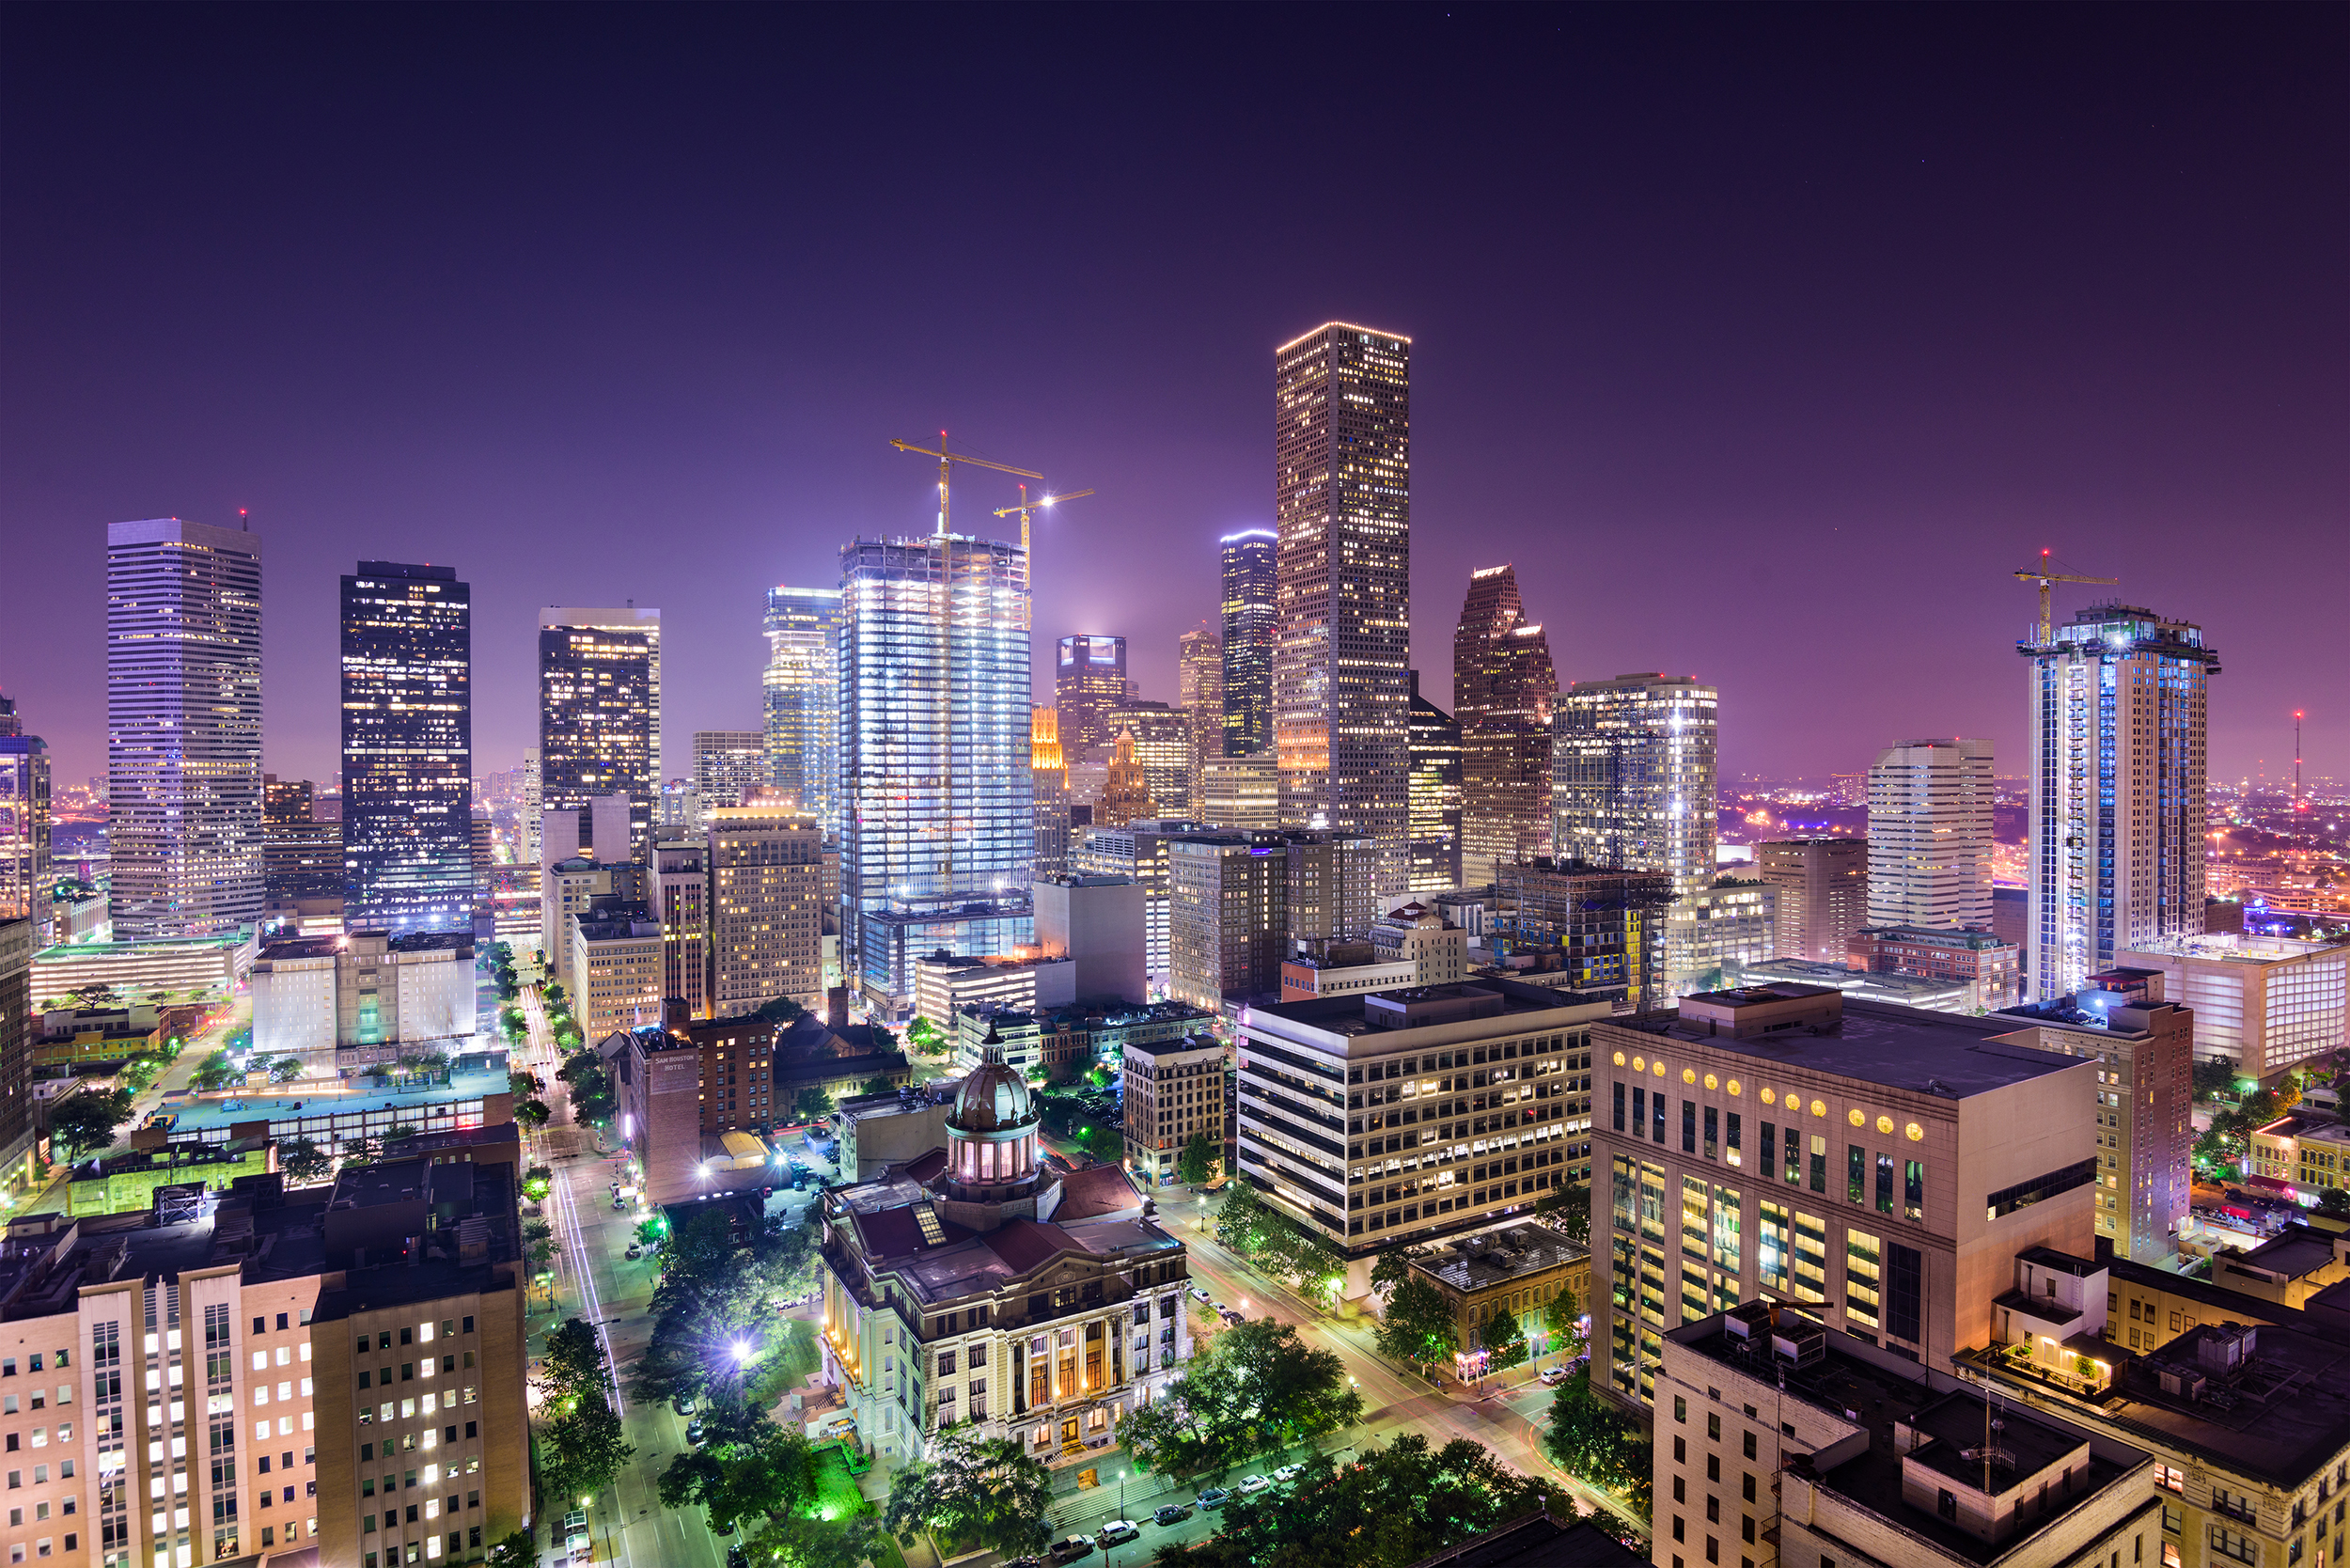 Uptown Houston - Experience Your Best Life